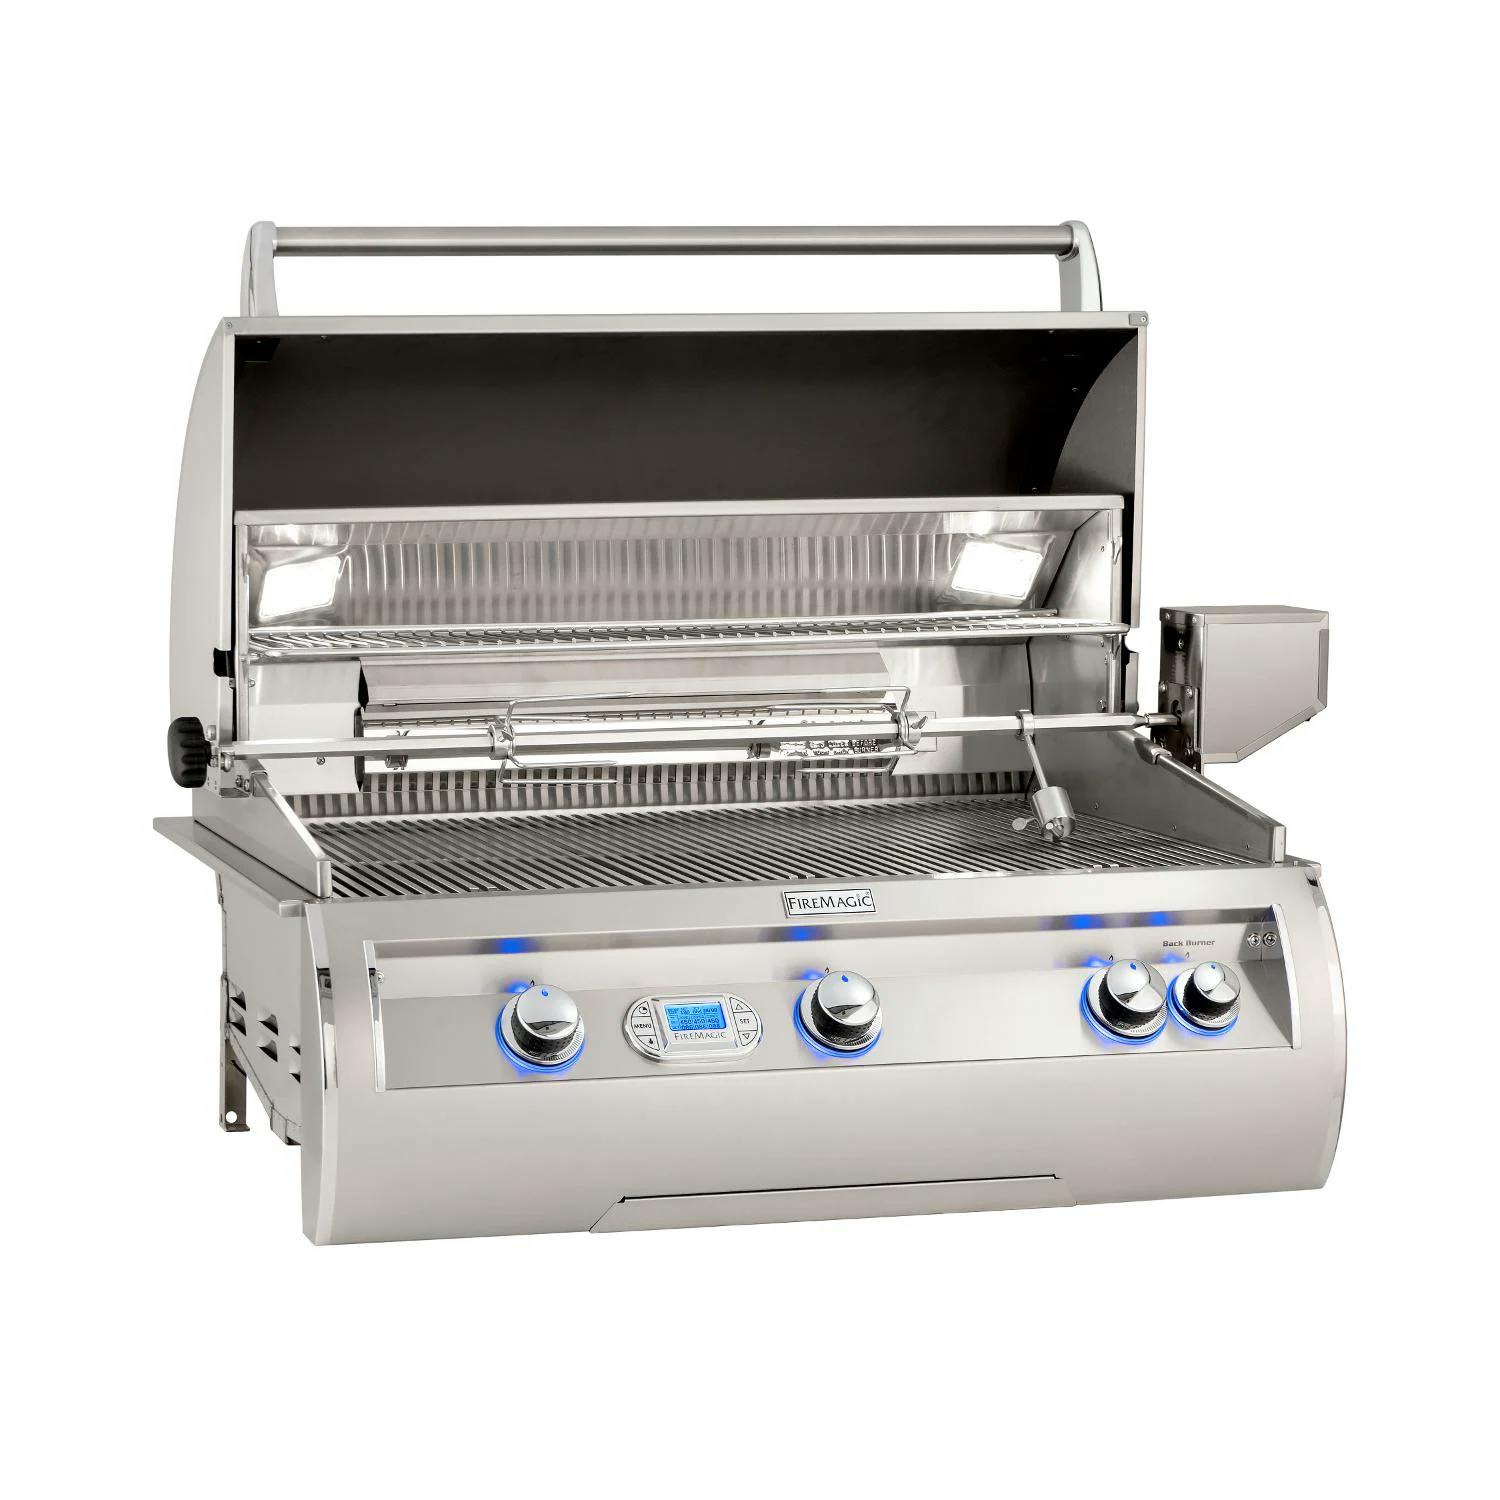 Fire Magic Echelon Diamond Built-in Gas Grill with One Infrared Burner, Rotisserie, and Digital Thermometer